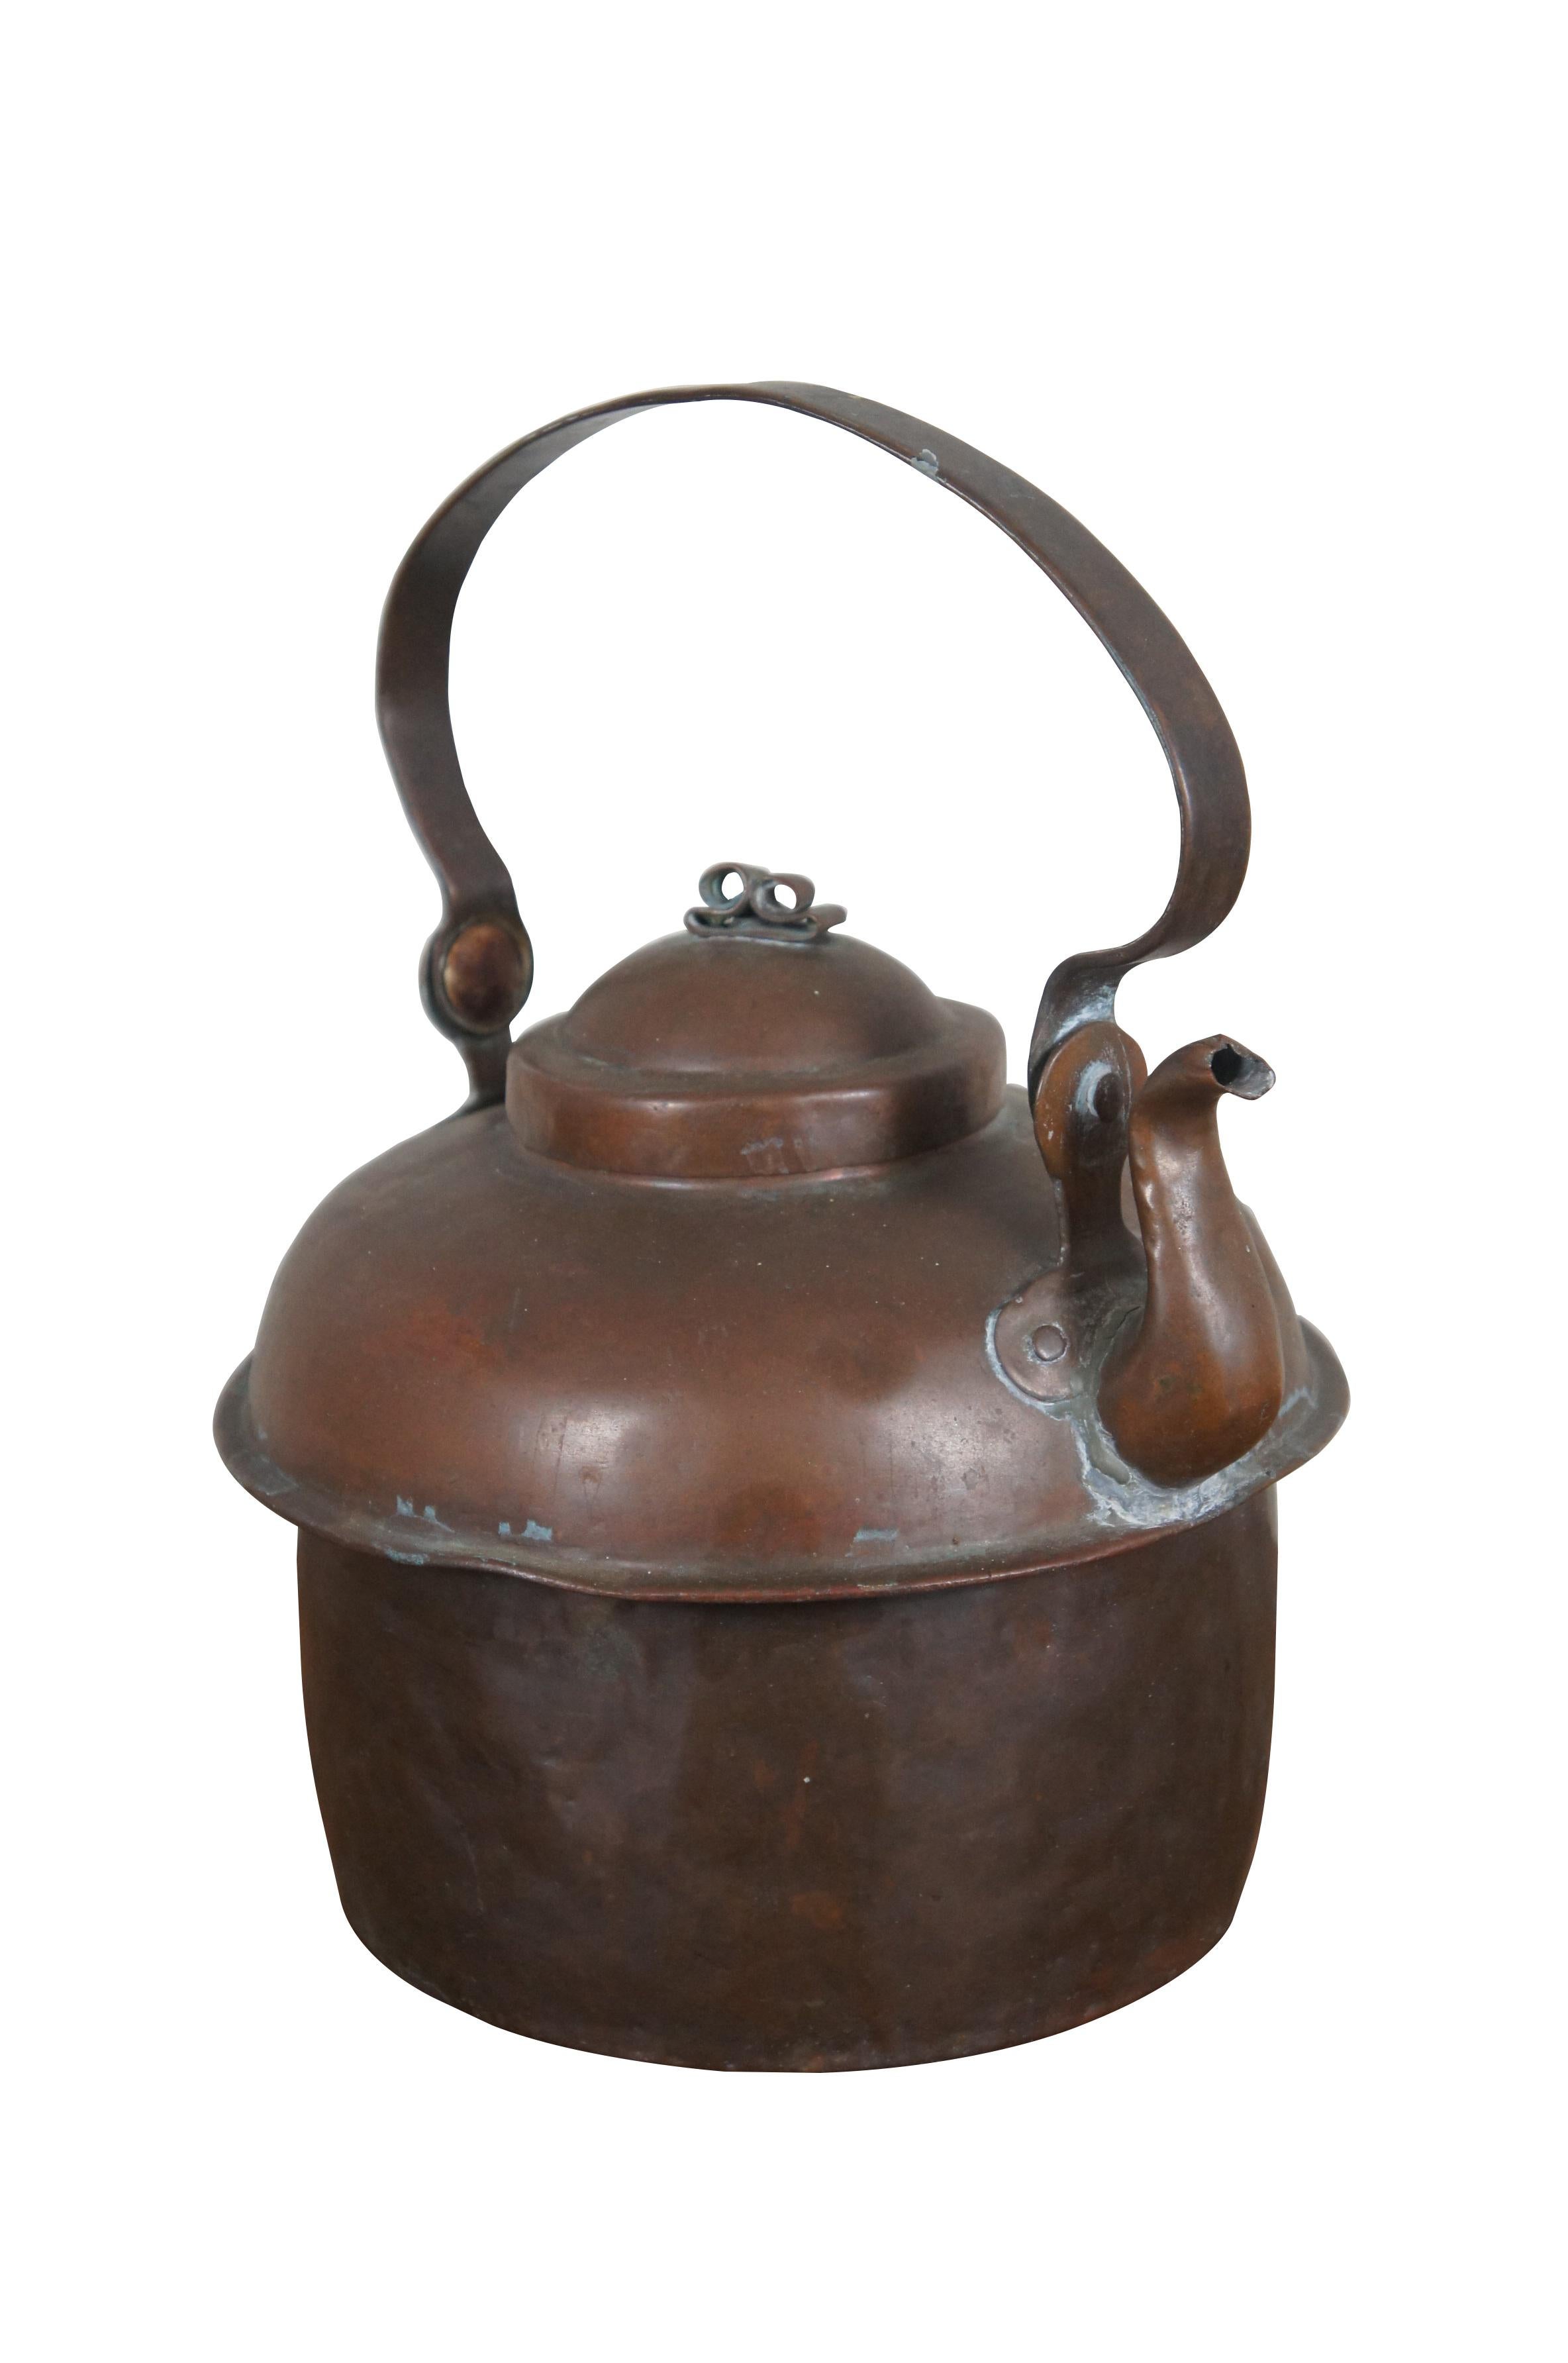 Large 19th century dovetailed copper farmhouse kettle / coffee pot with gooseneck shaped spout, rotating bail handle and scrolled finial on the lid.

Dimensions:
9.75